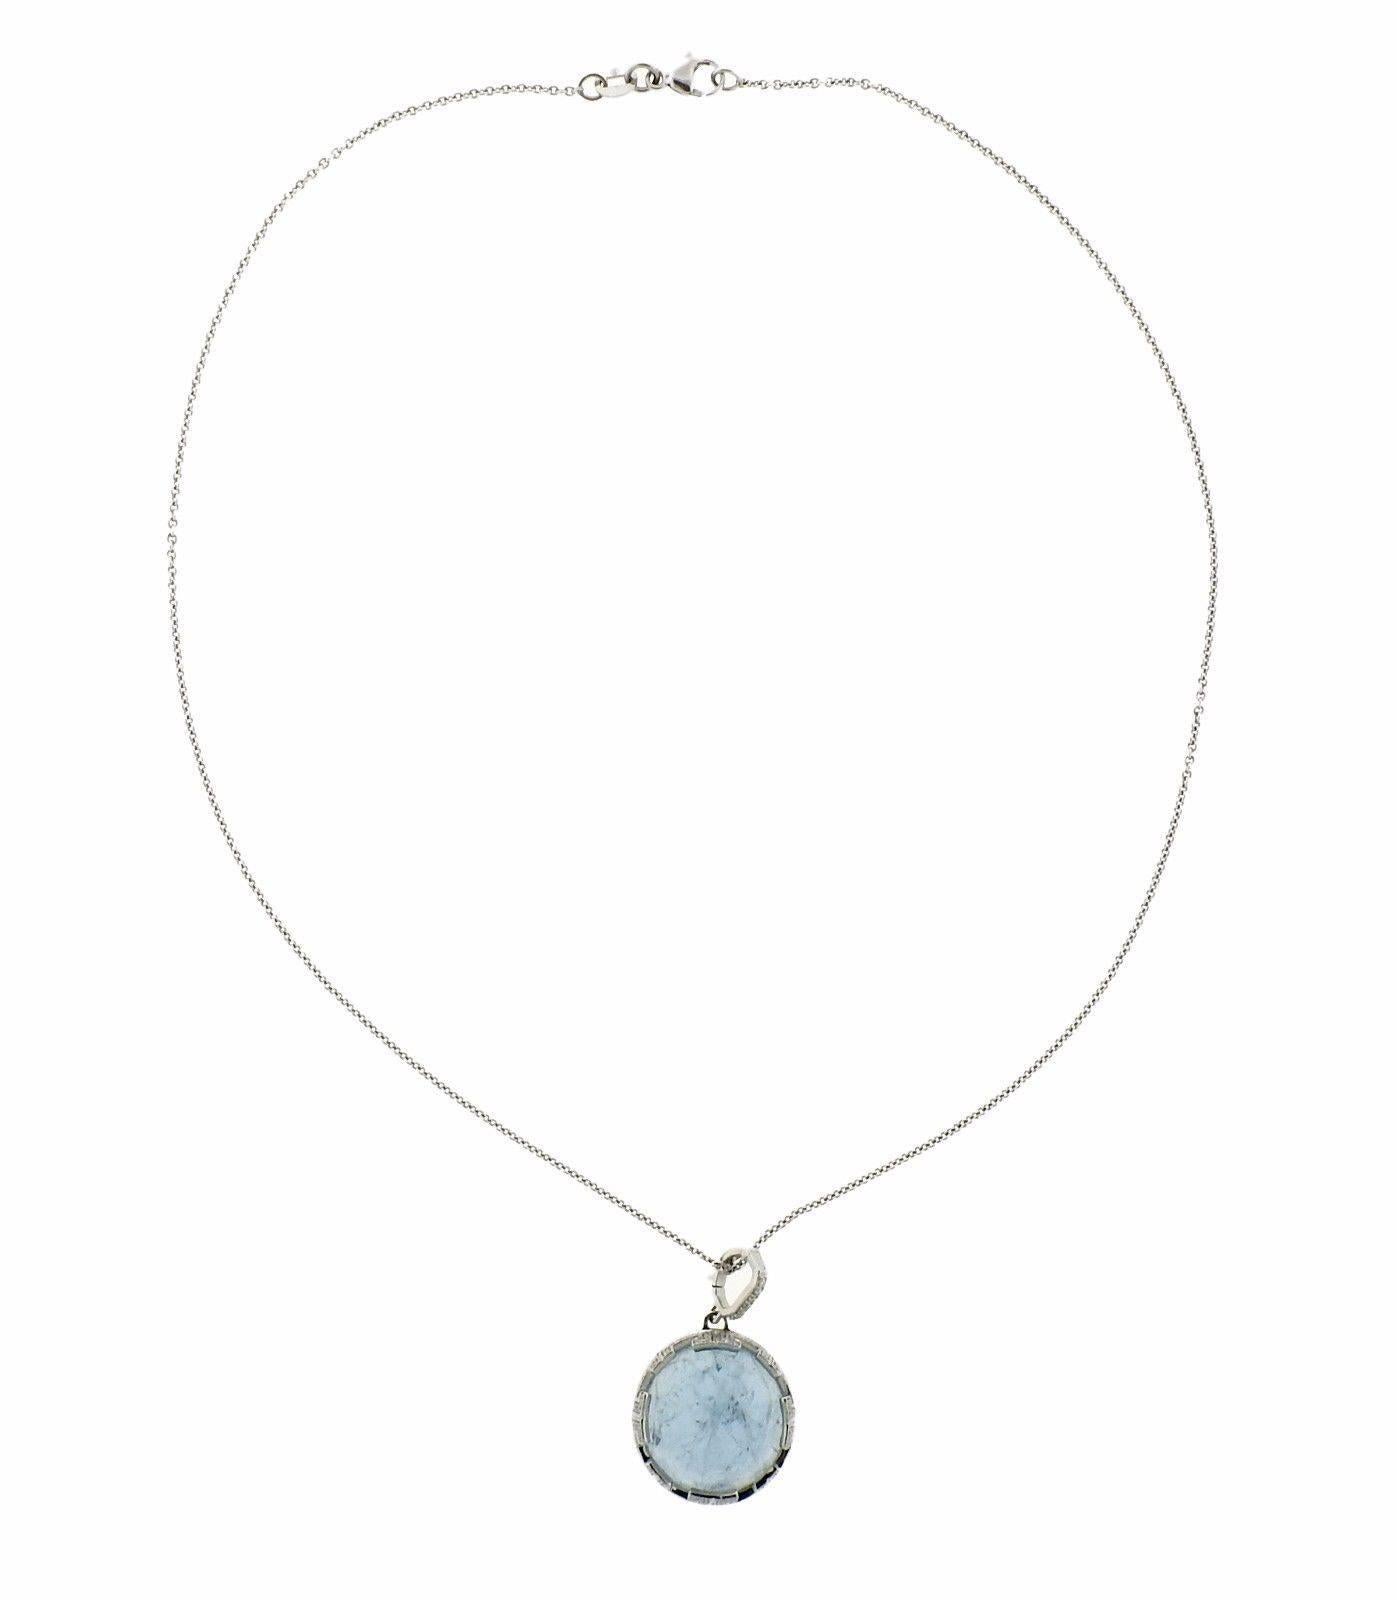 An 18k white gold necklace set with aquamarine and approximately 0.36ctw of G/VS diamonds.  The necklace is 16" long, pendant measures 18mm in diameter.  The weight of the piece is 9.9 grams. Marked: Ivanka Trump,18k, italy.  Retail for this